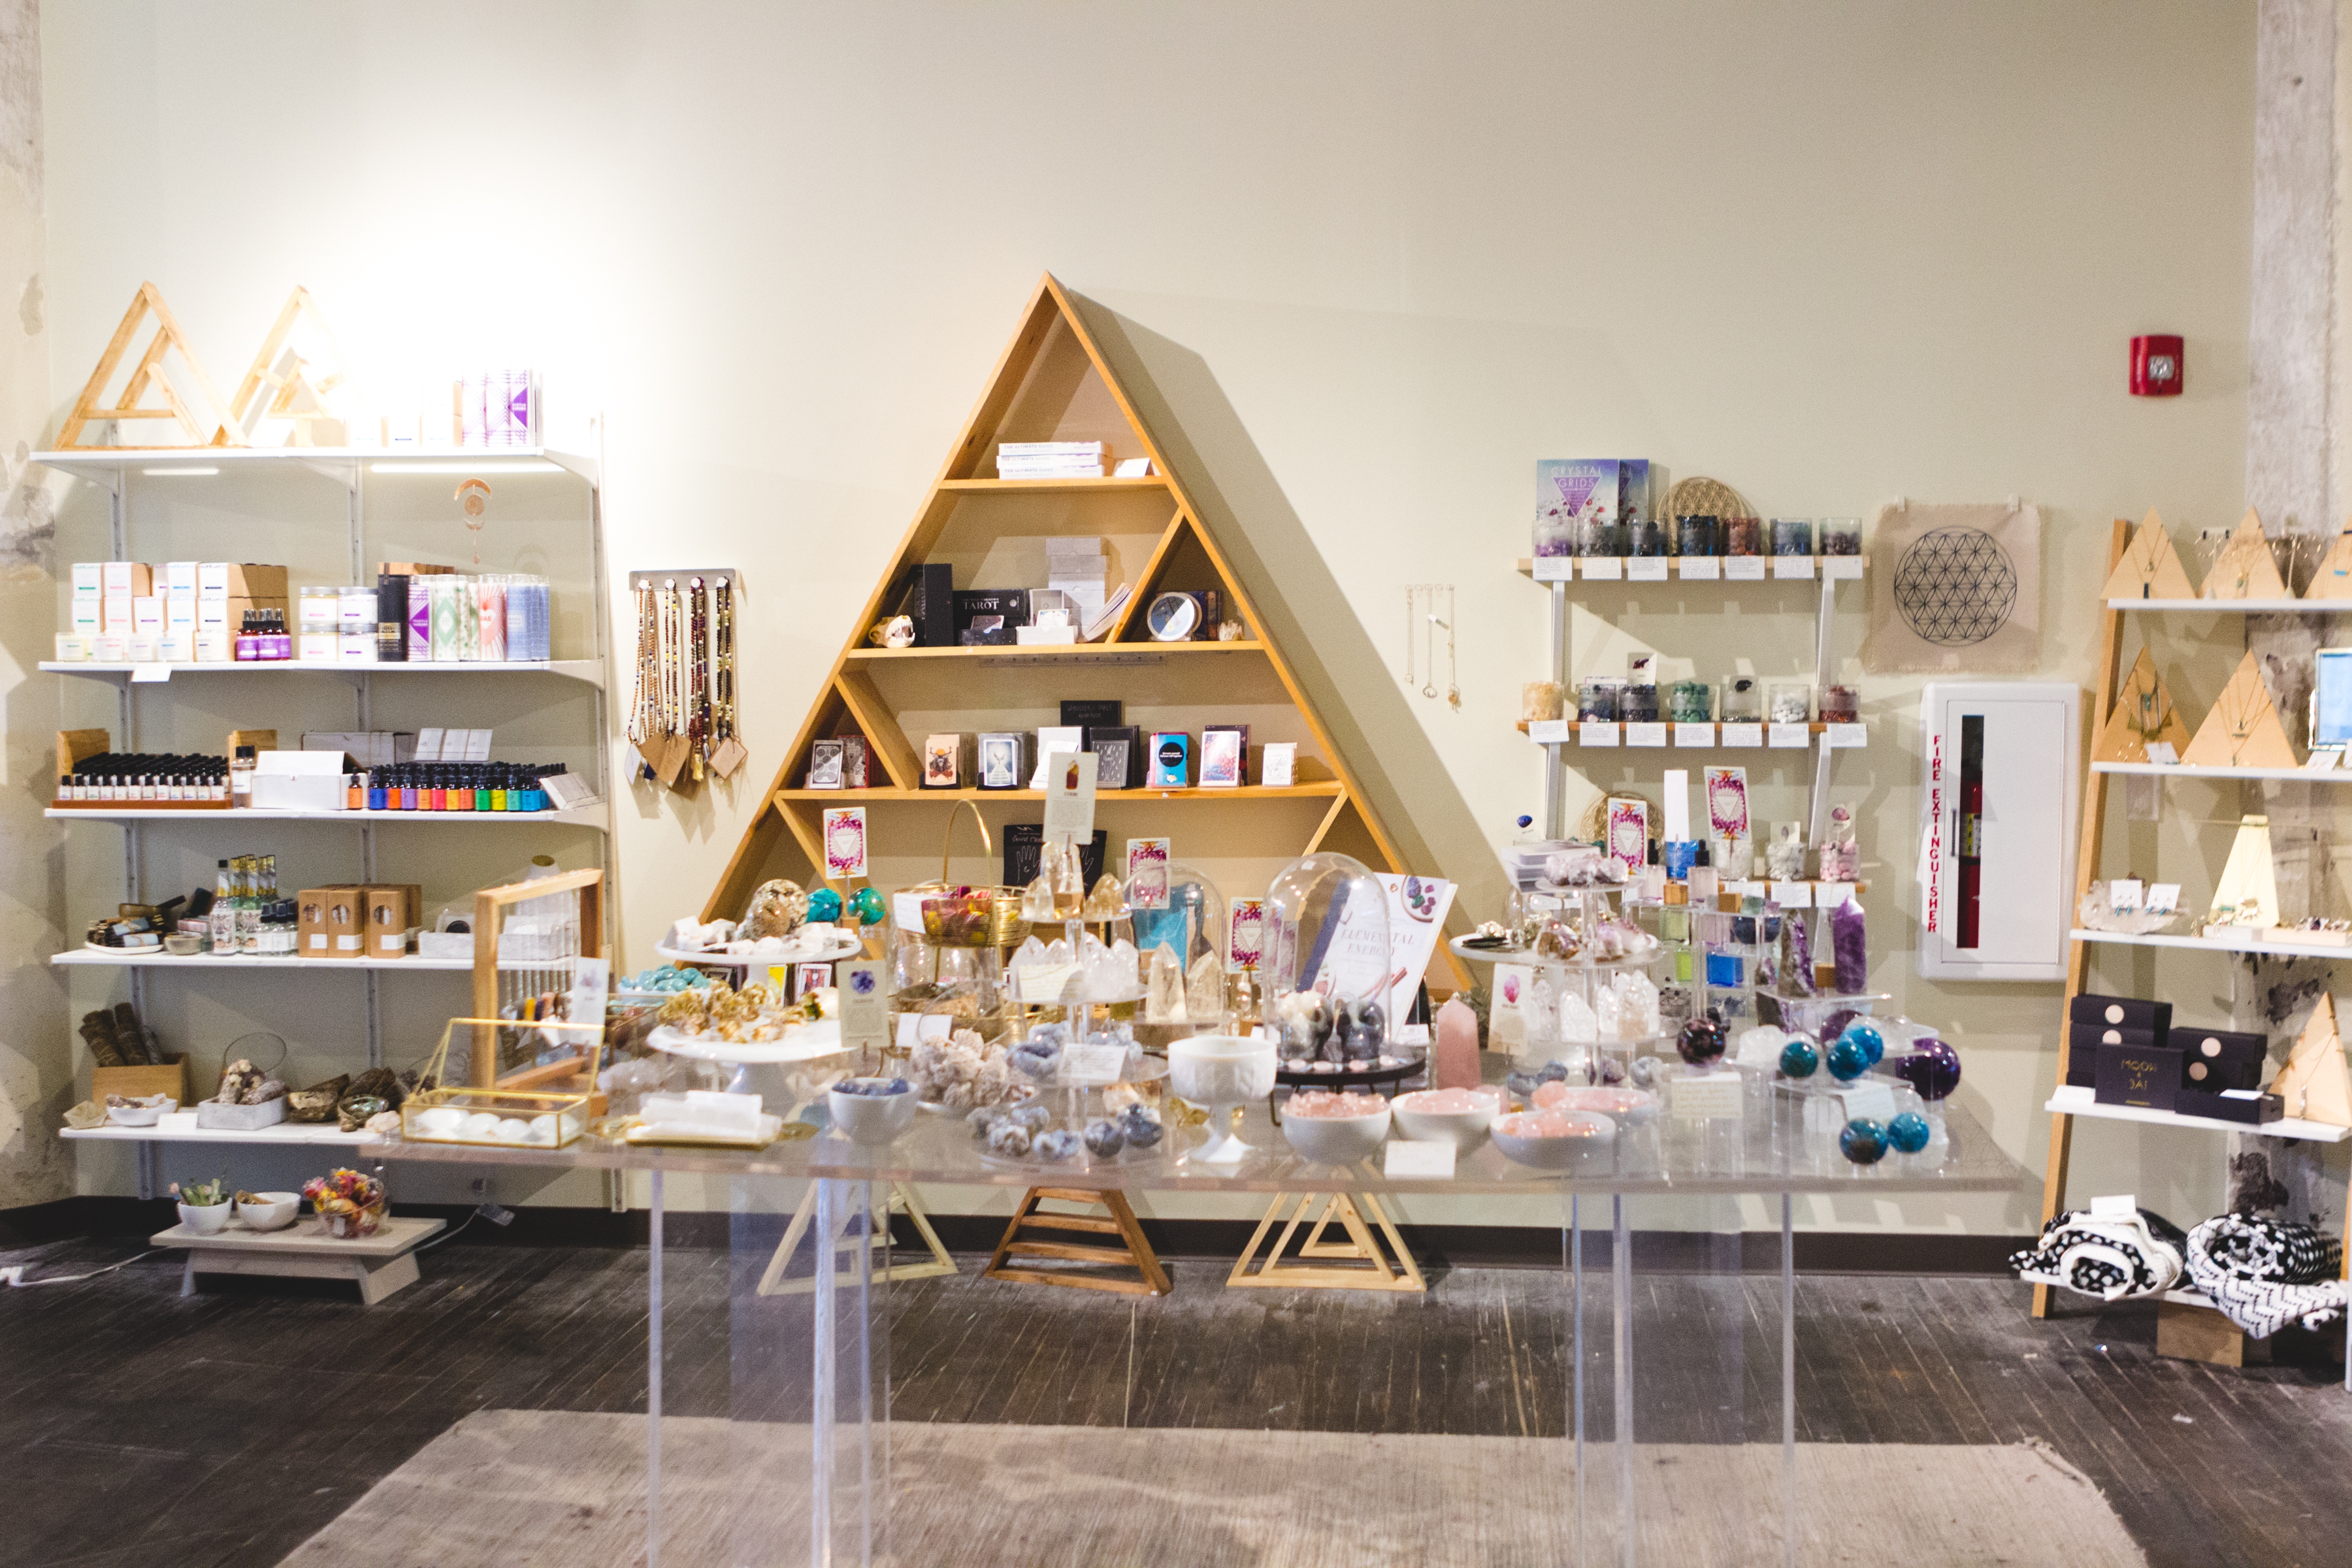 Local Gem and crystal stone store with cool modern chic decor, light and airy feel